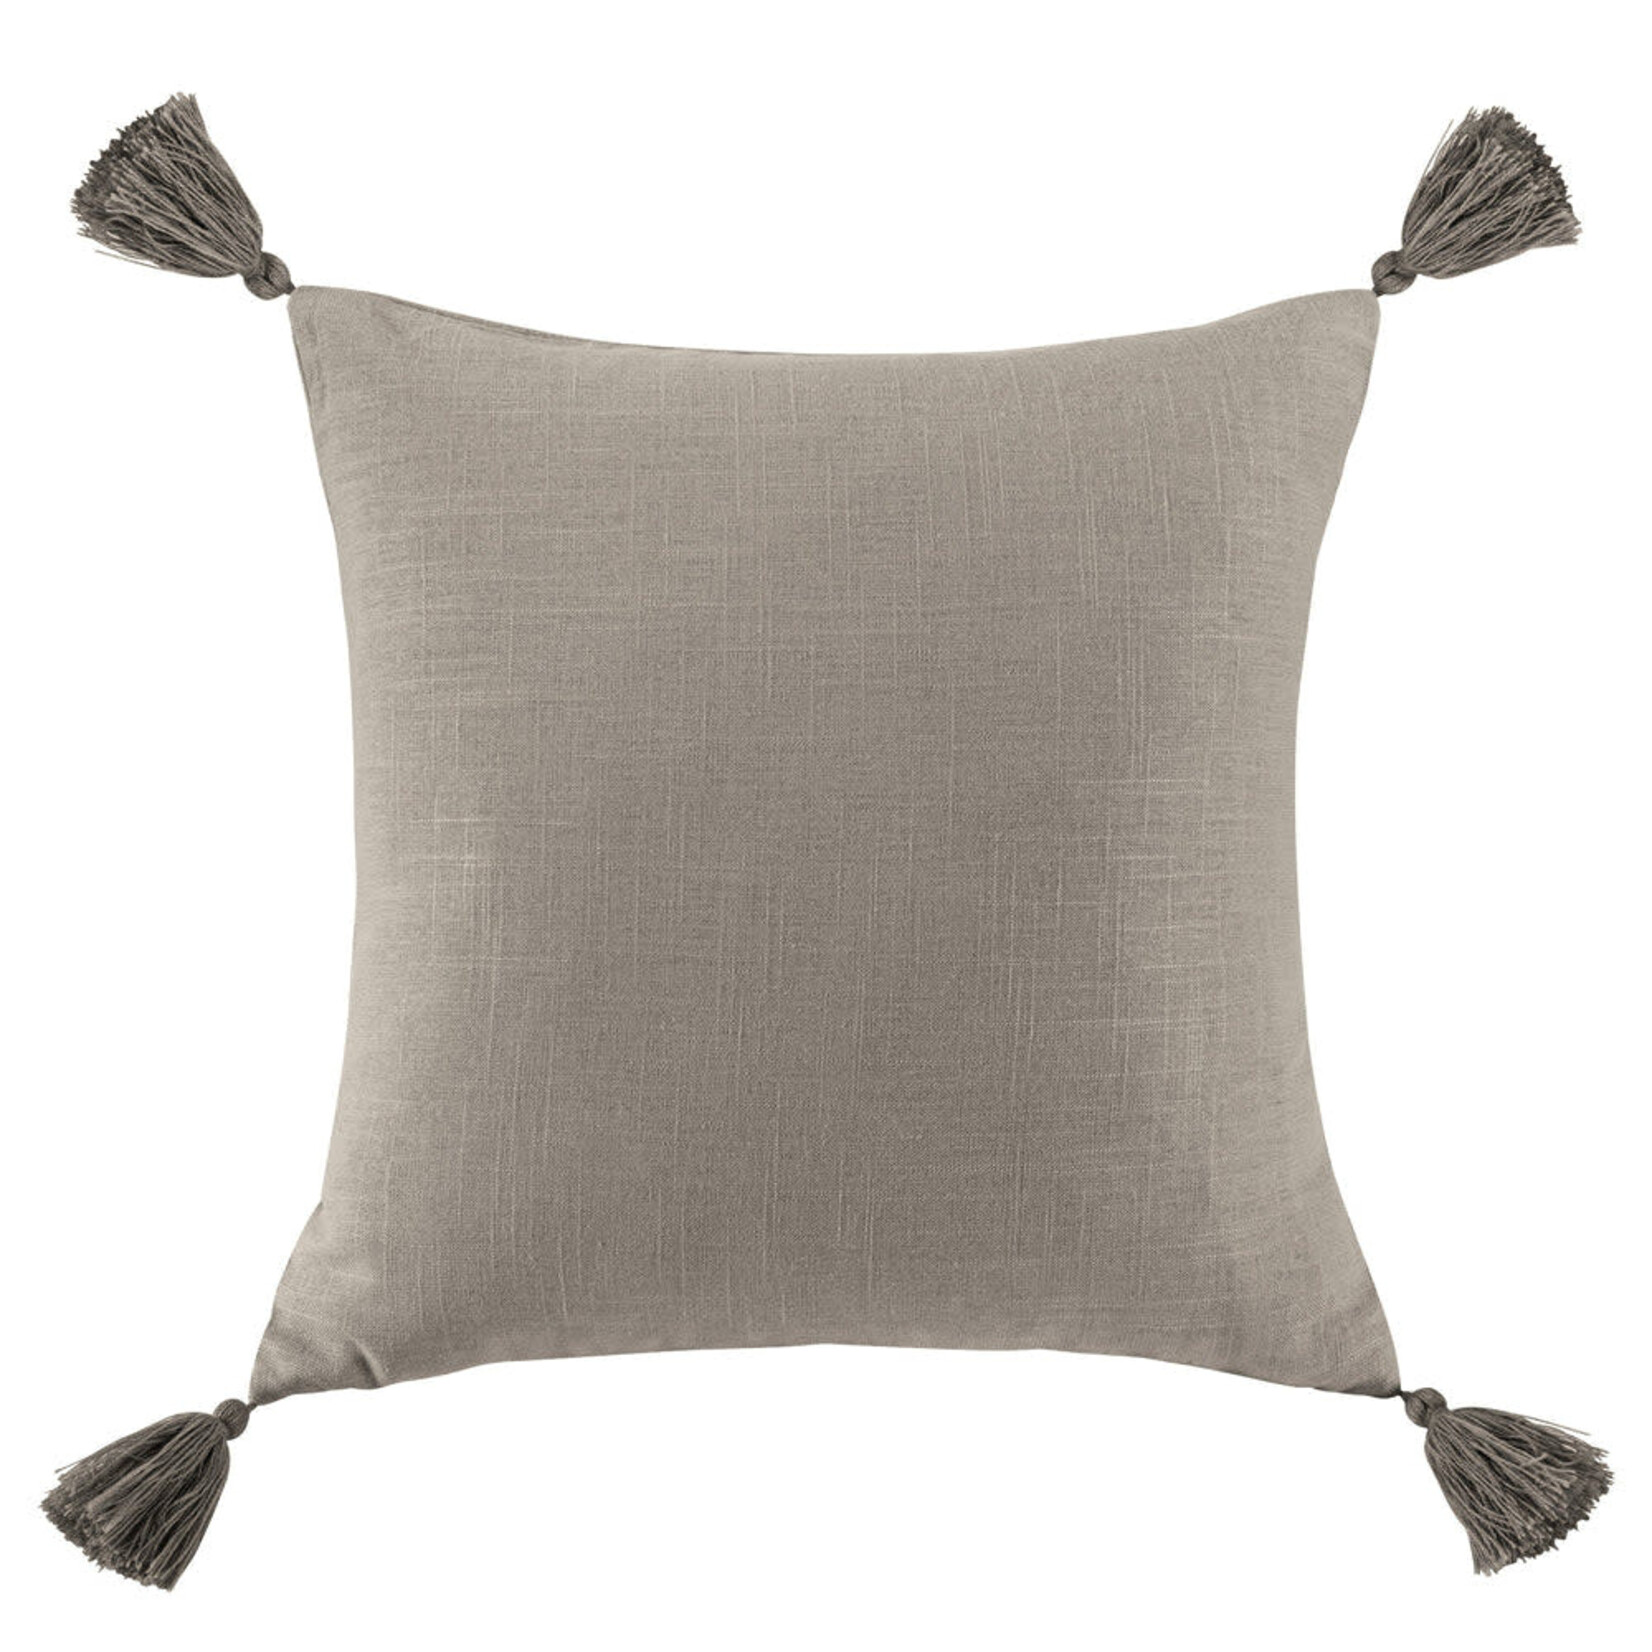 HiEnd Accents Square Washed Linen Tasseled 18"x18" Bed Accent Pillow